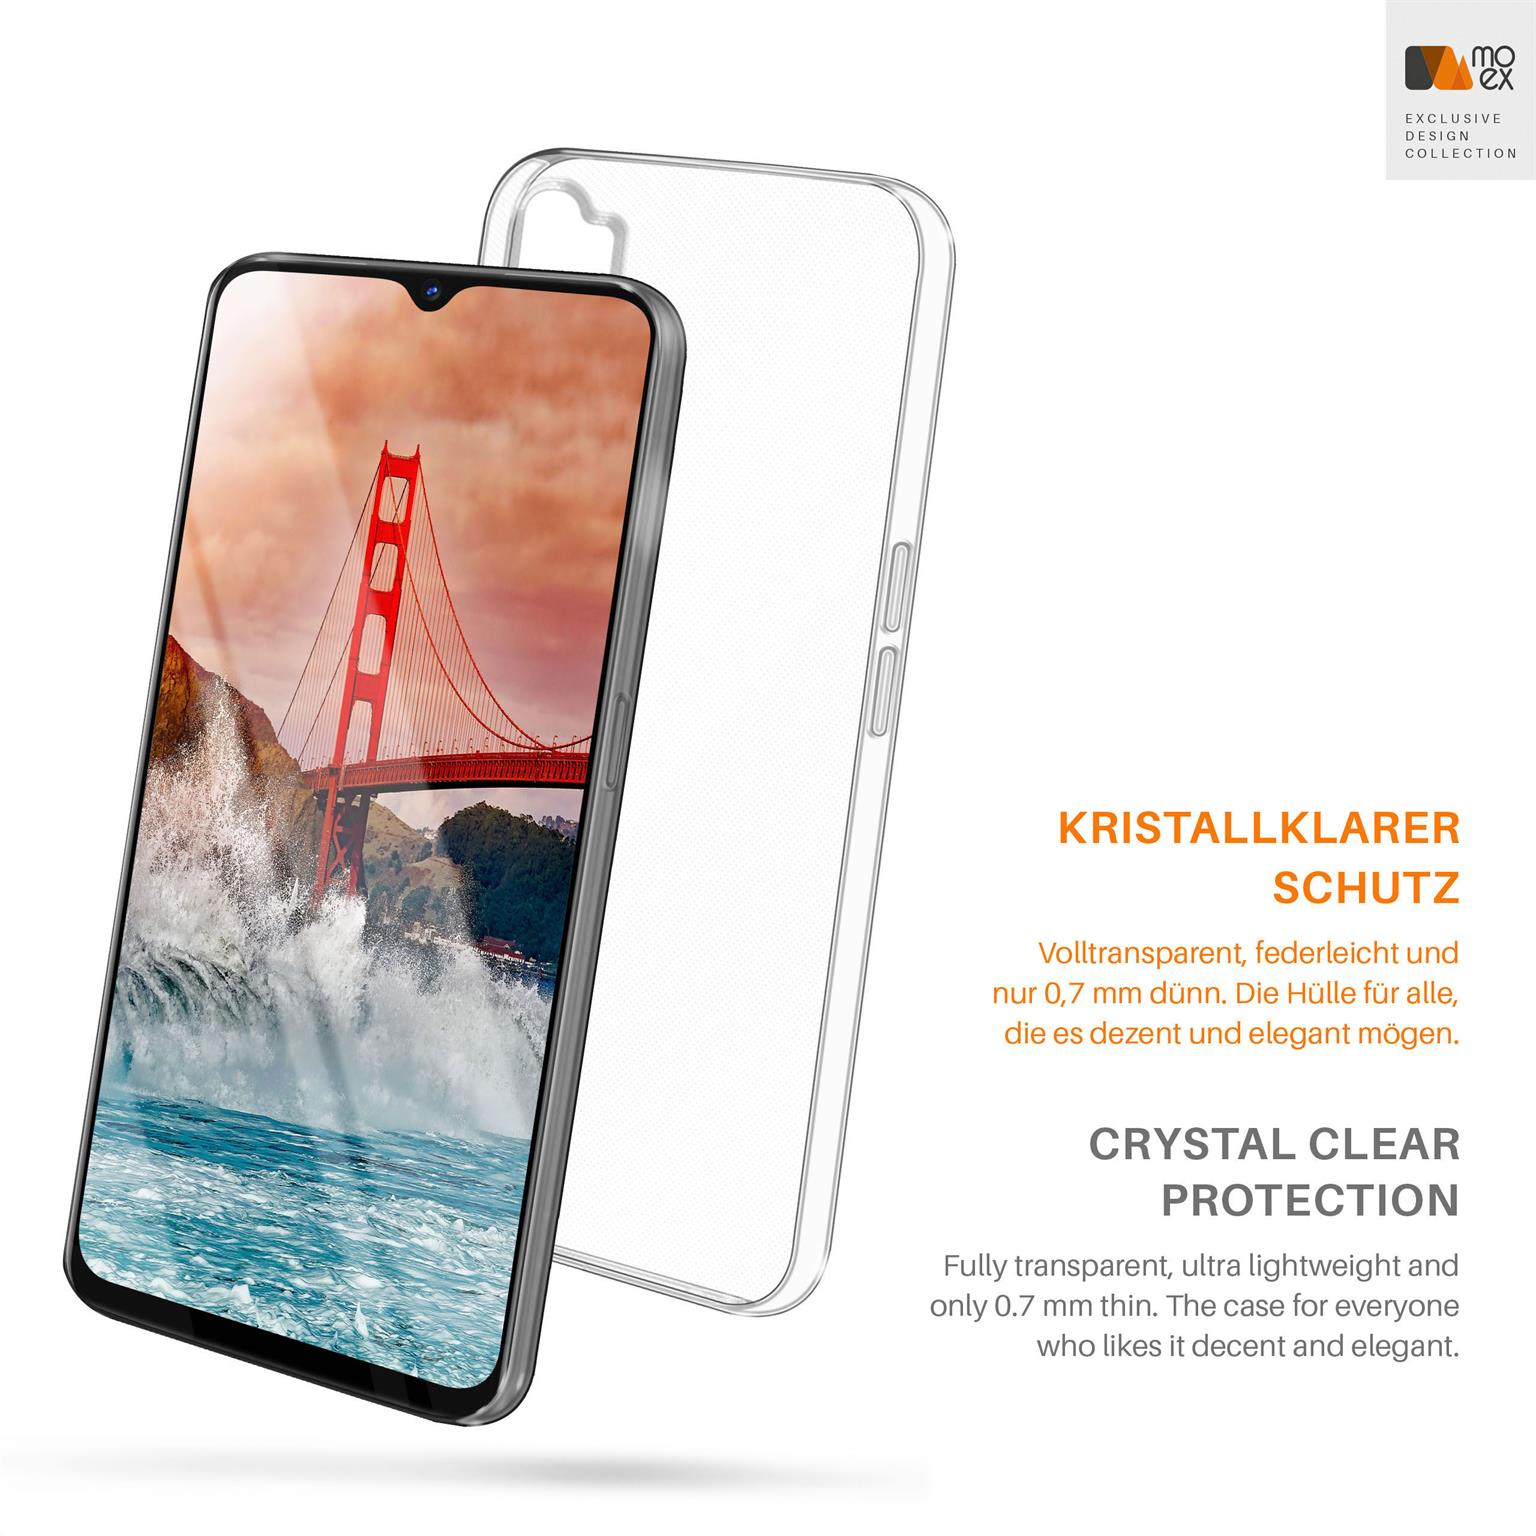 MOEX Aero Case, Backcover, Oppo, Crystal-Clear Lite, X2 Find